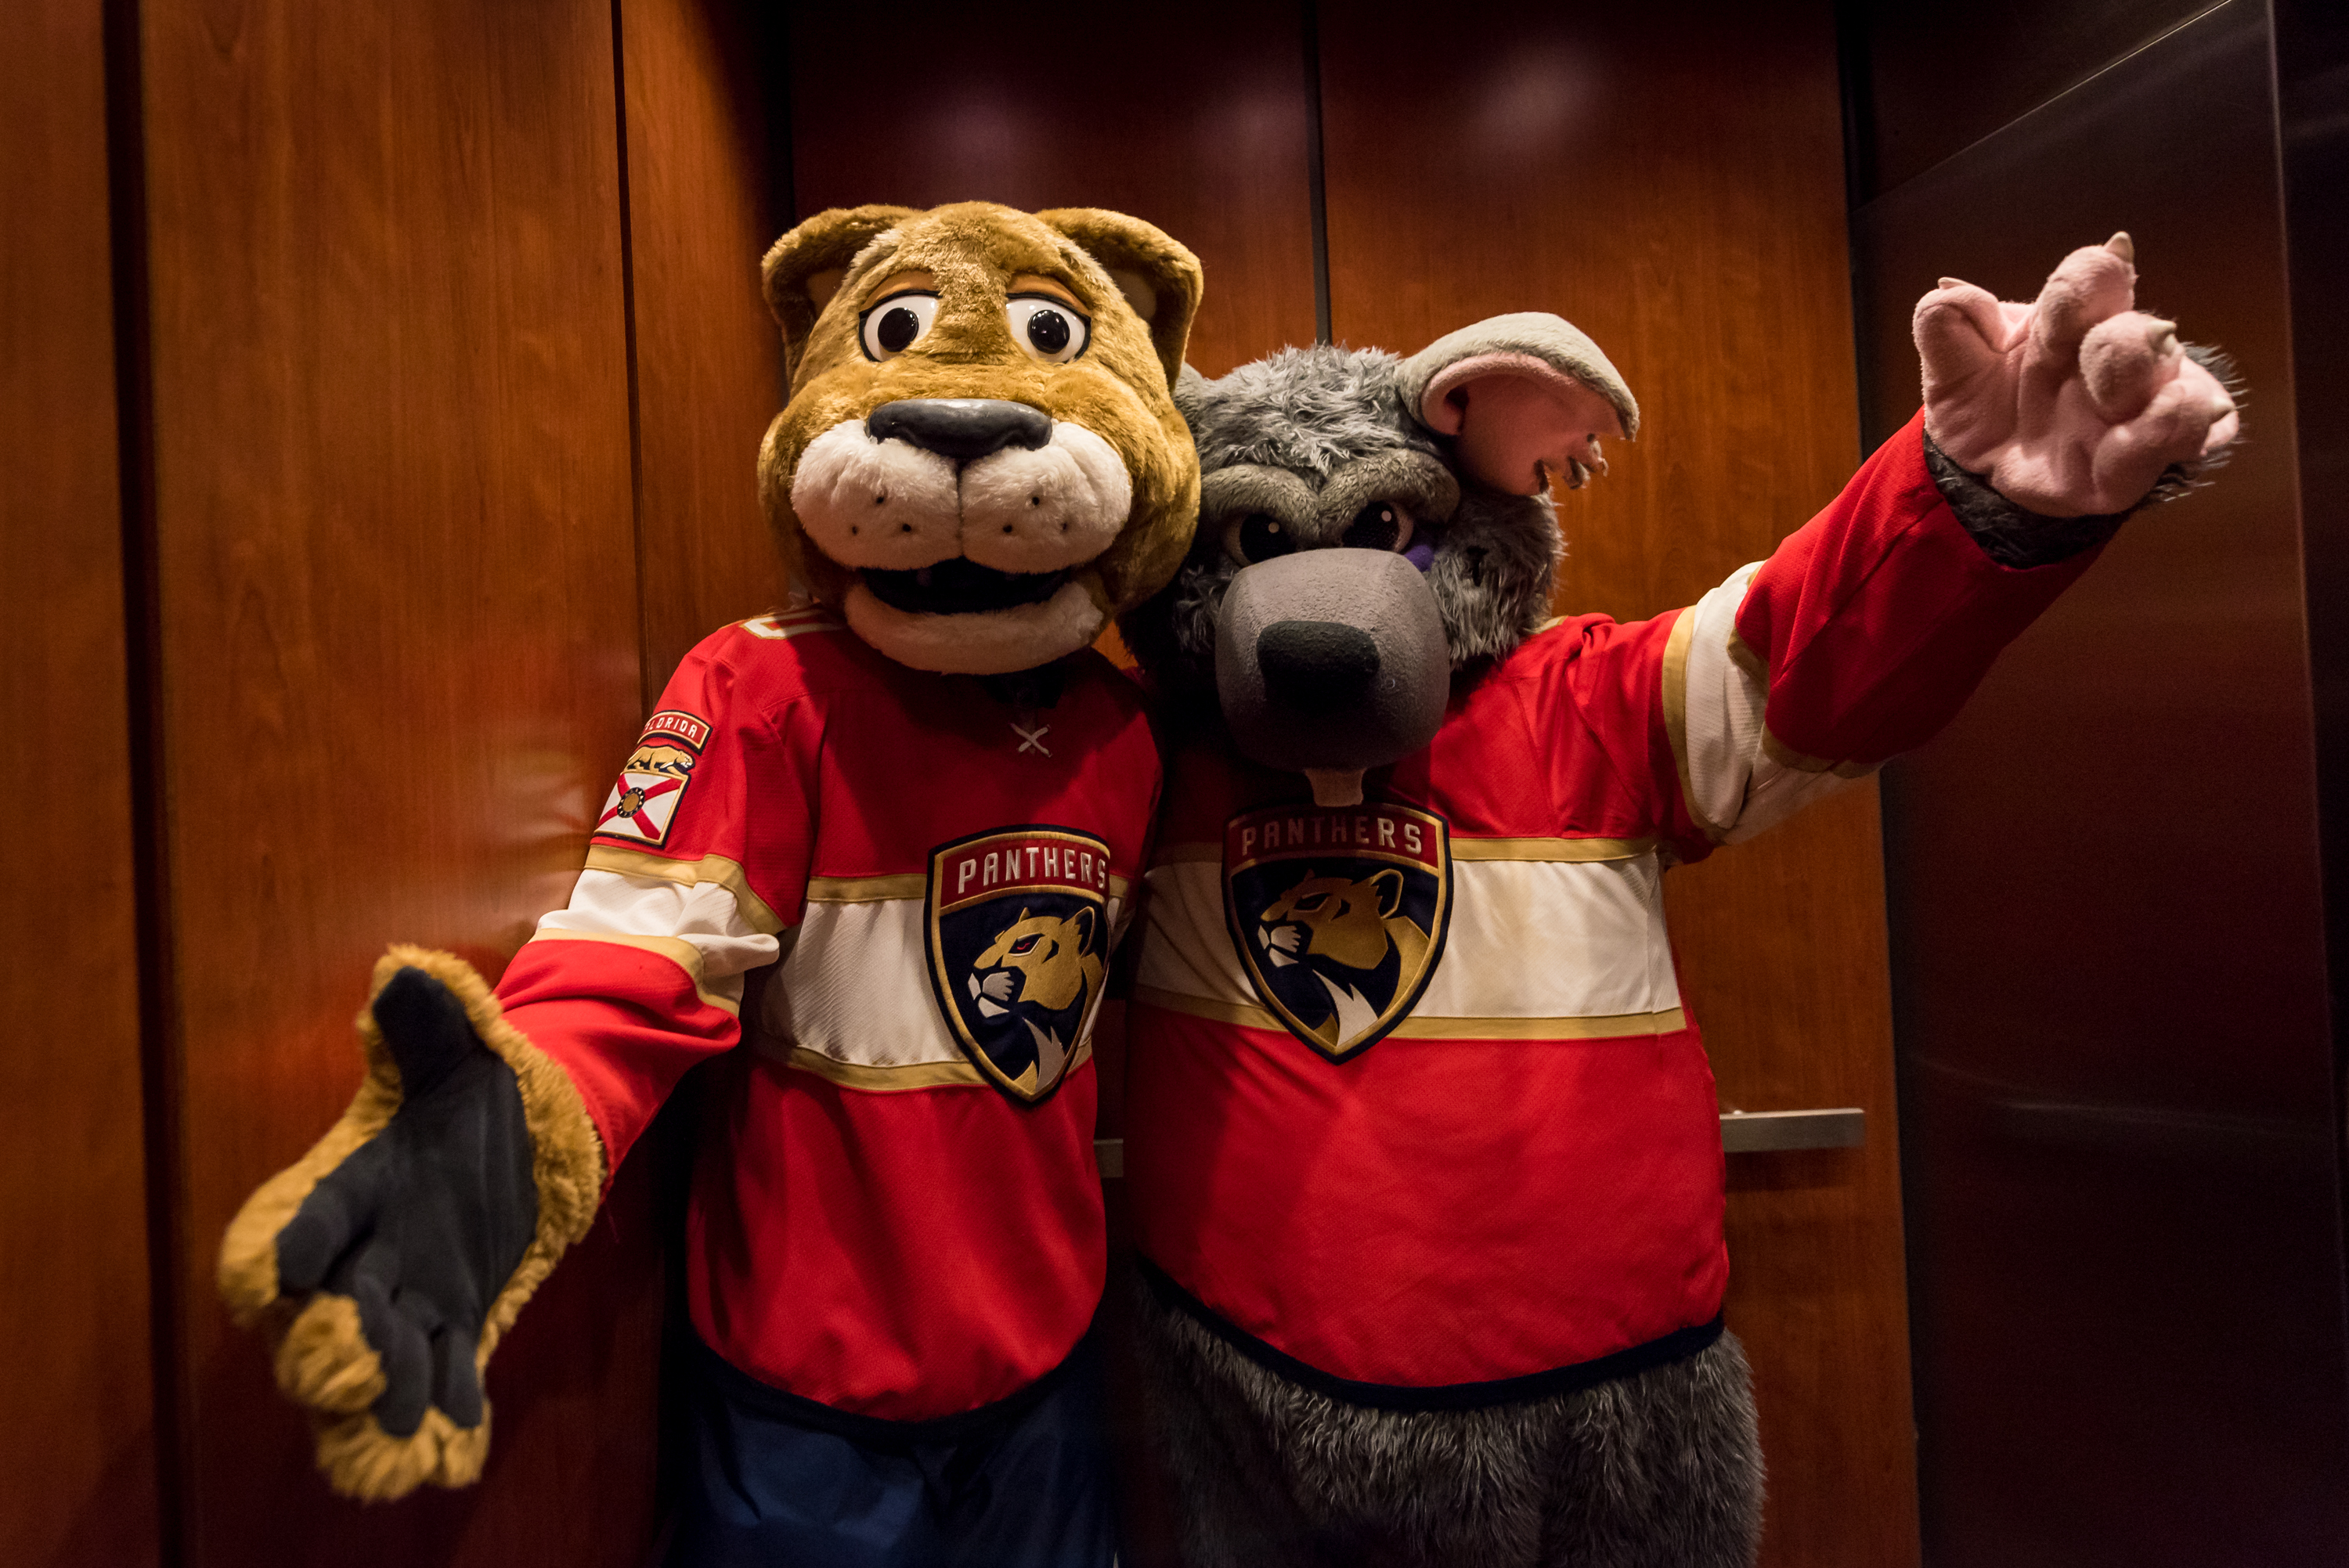 Who are the Florida Panthers' mascots? Get to know all about